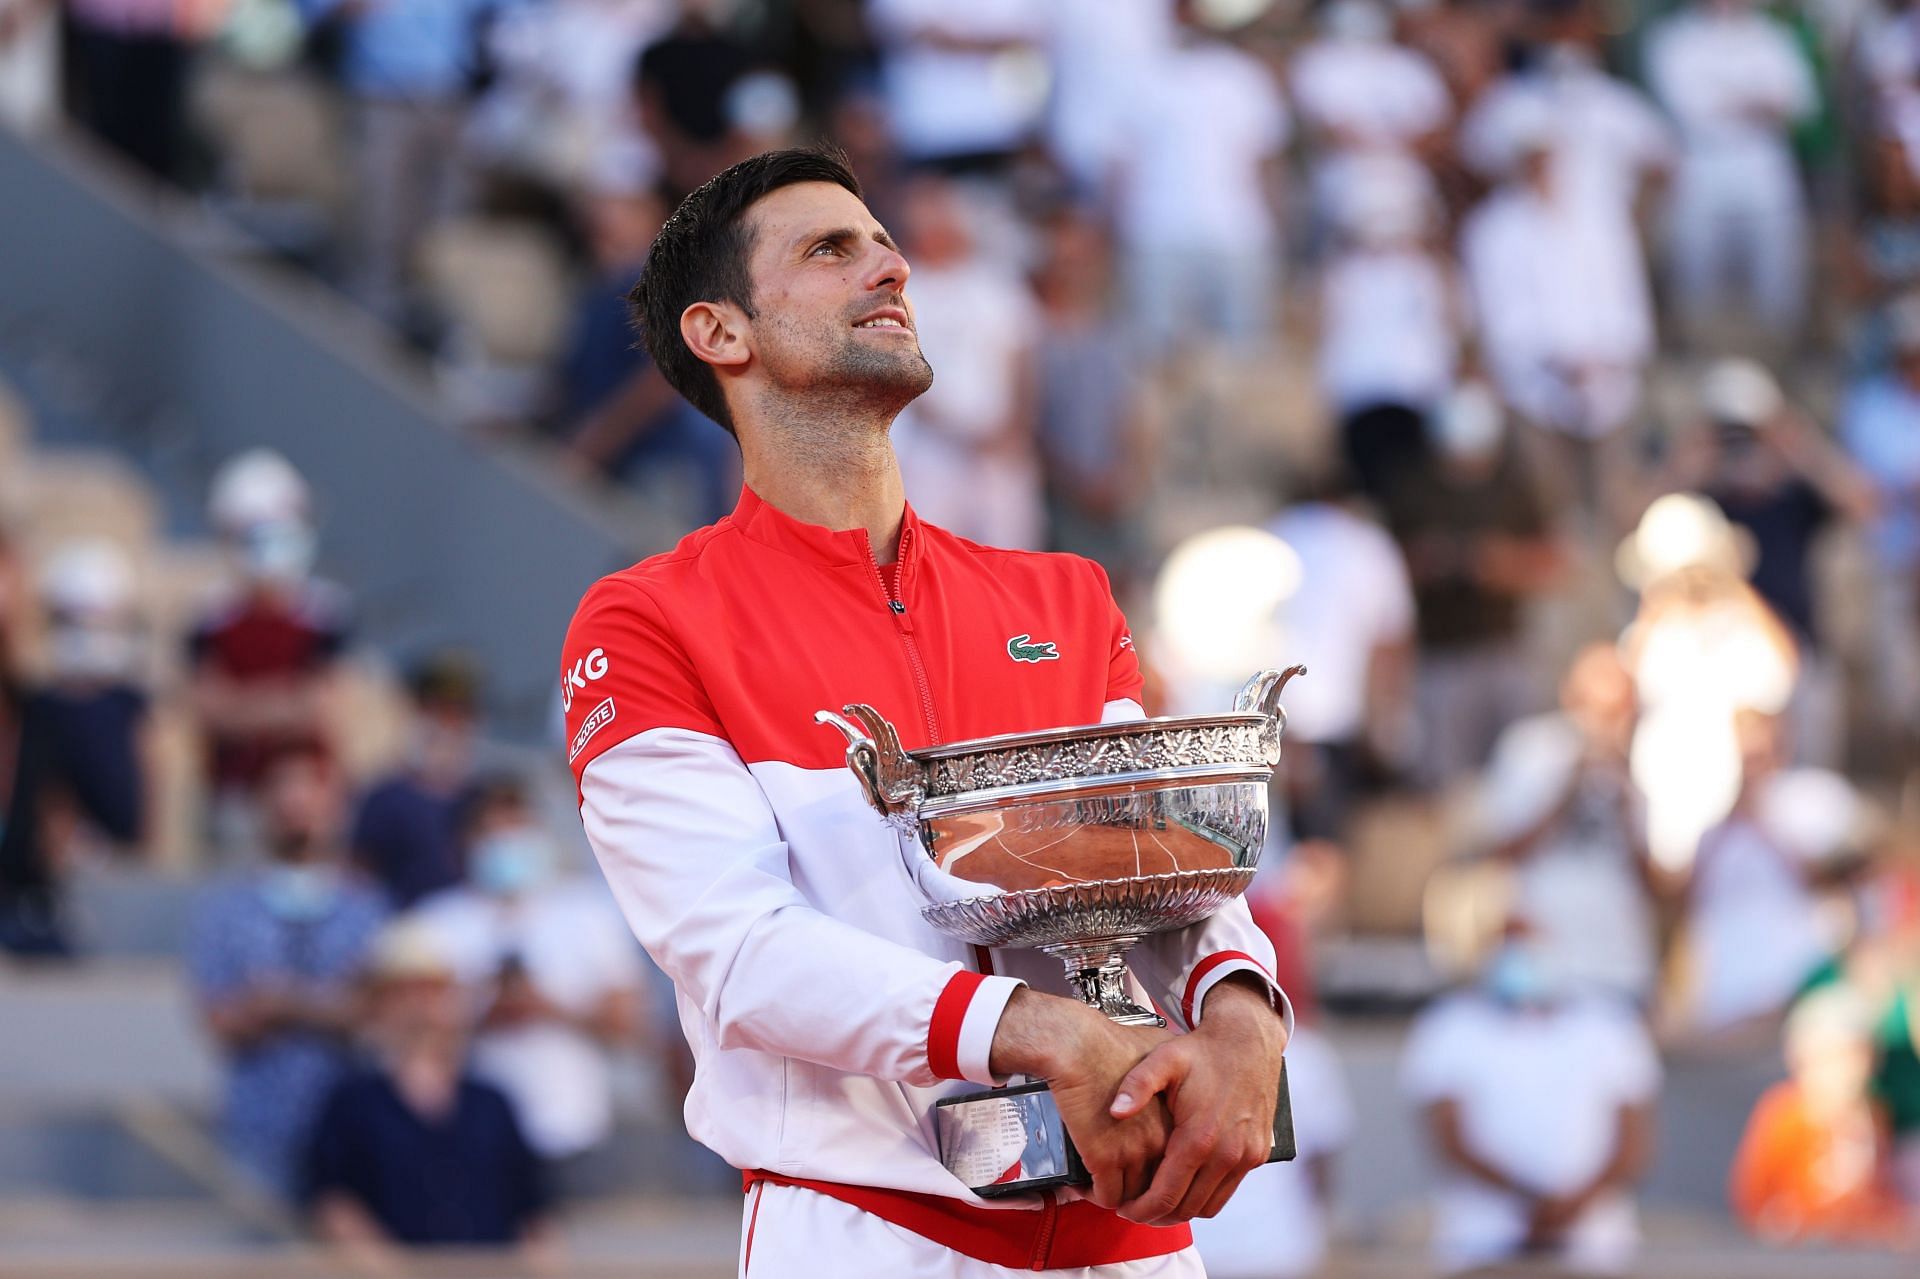 Novak Djokovic has three more tournaments to fine tune himself for the French Open